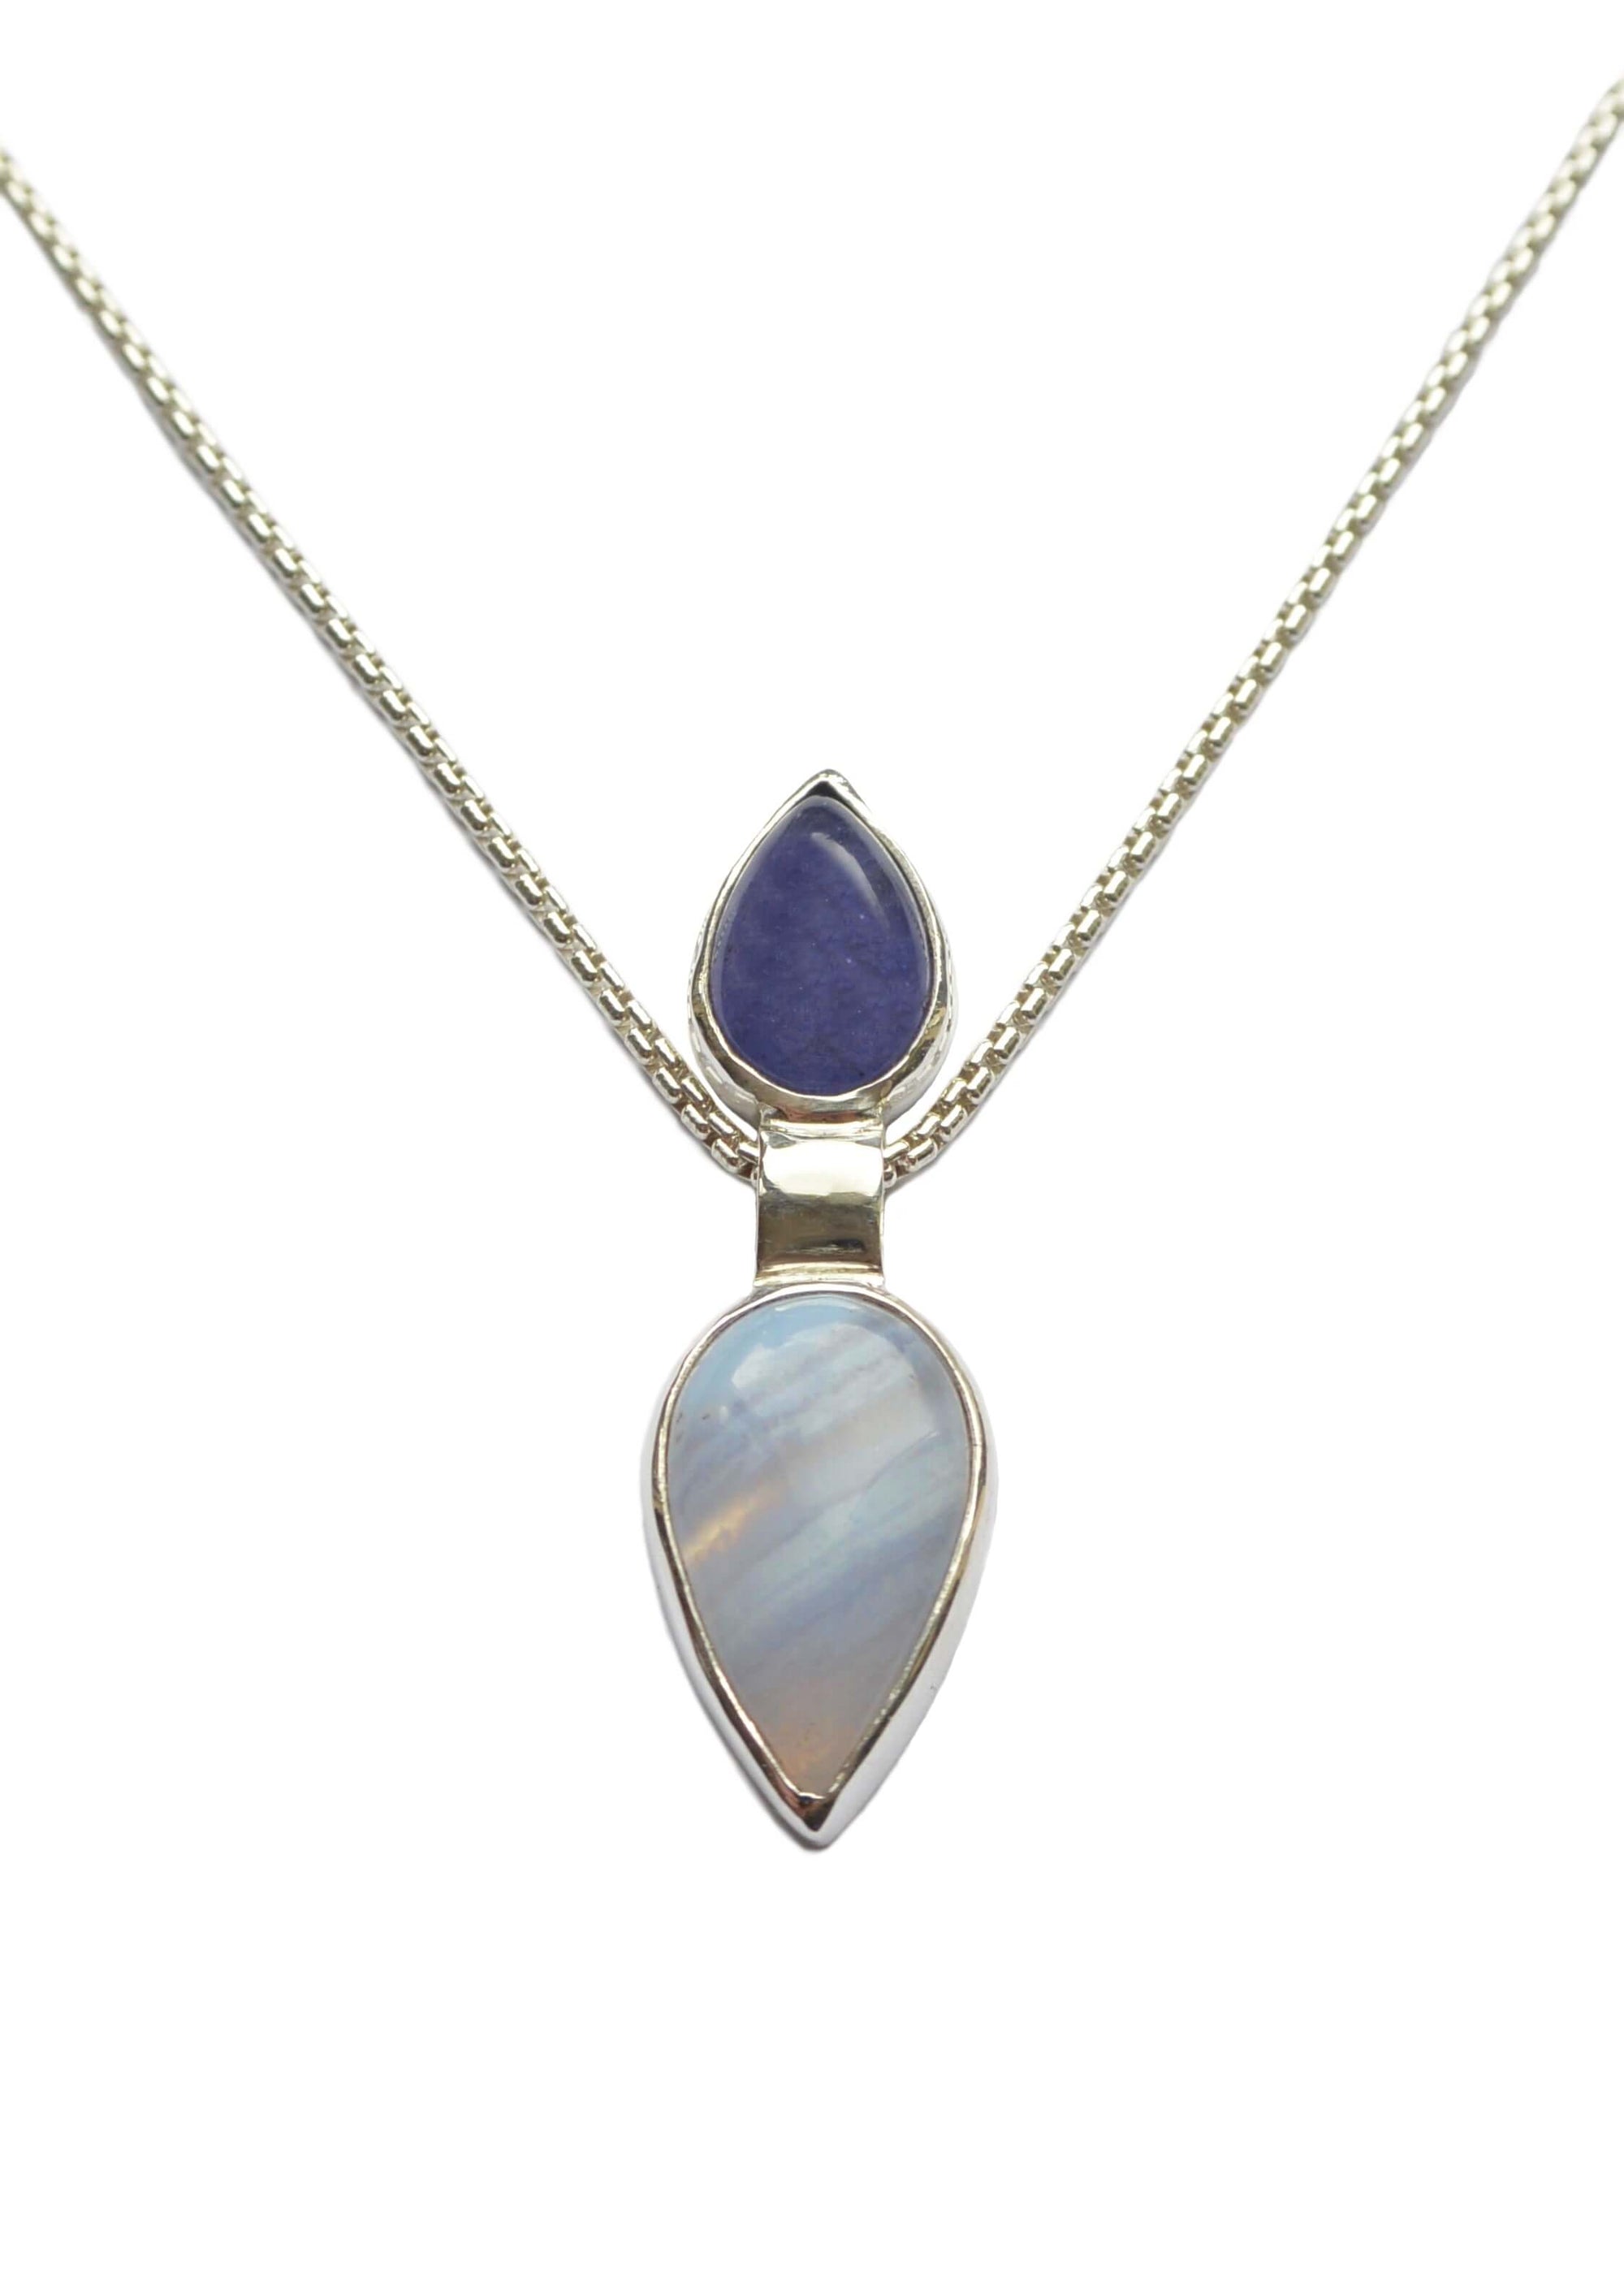 A handmade sterling silver tanzanite pendant with blue agate